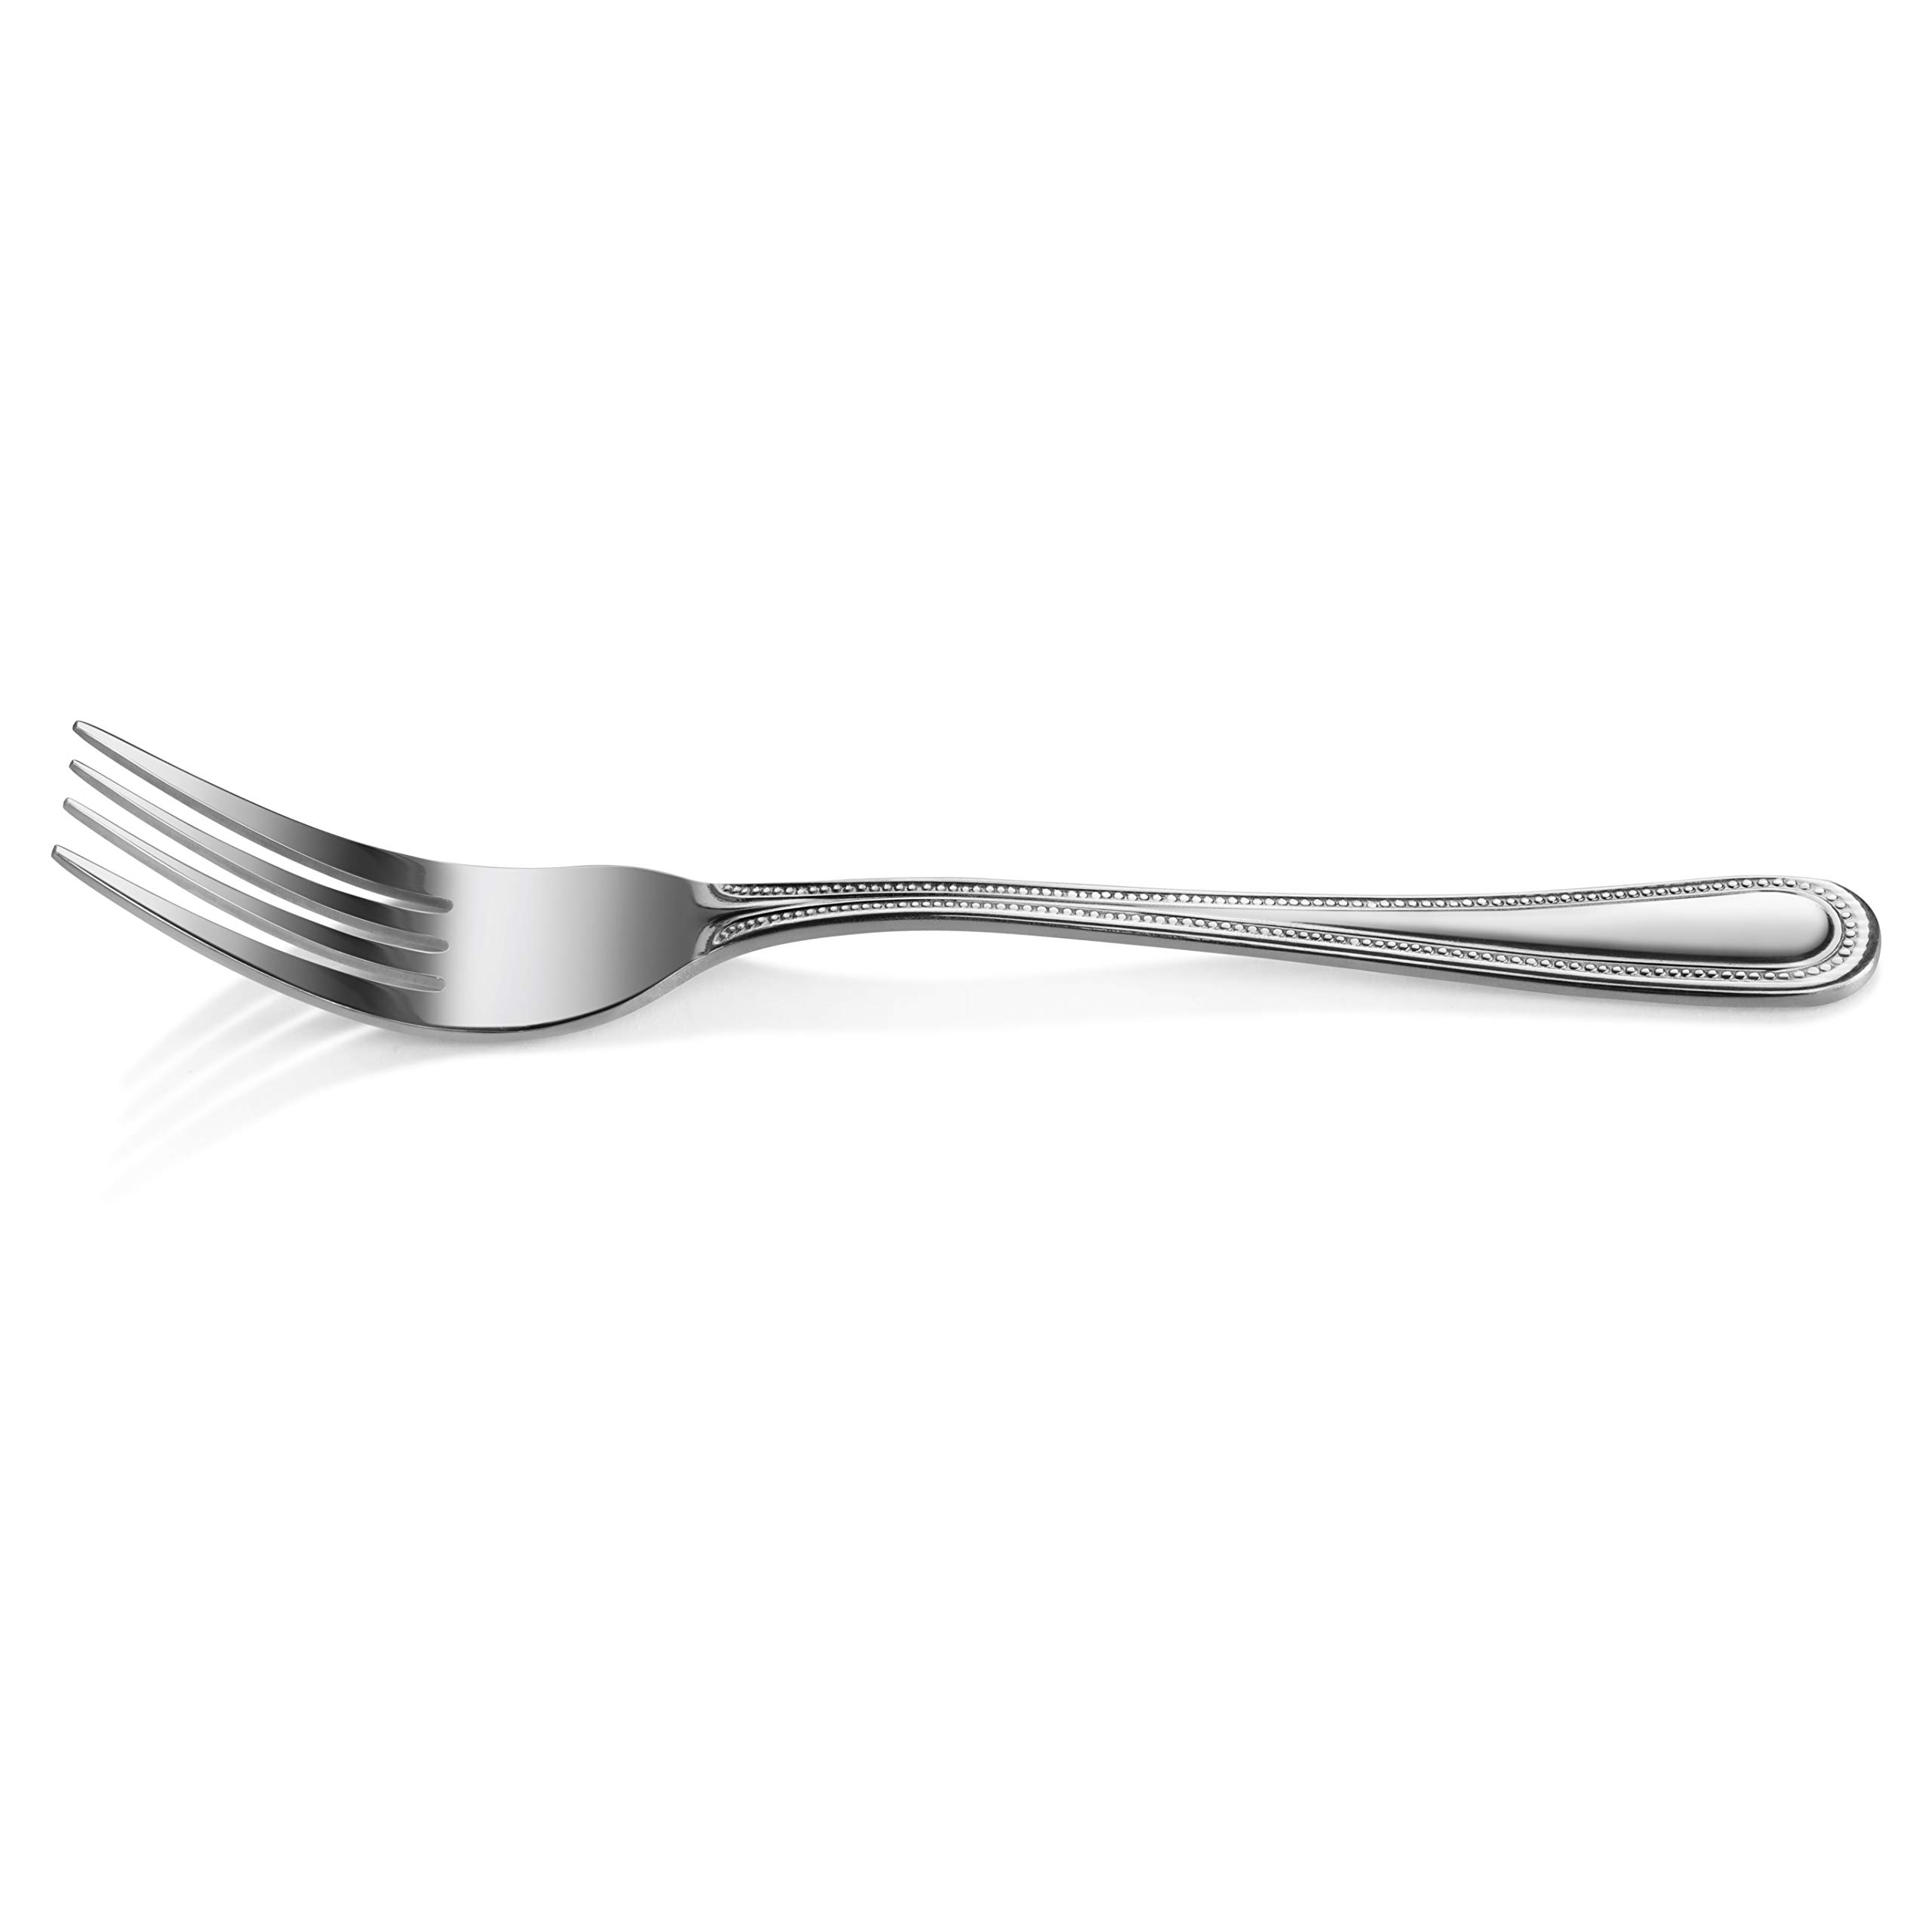 New Star Foodservice 58468 Bead Pattern 18/0 Stainless Steel, Dinner Fork 7.7-Inch Set of 12